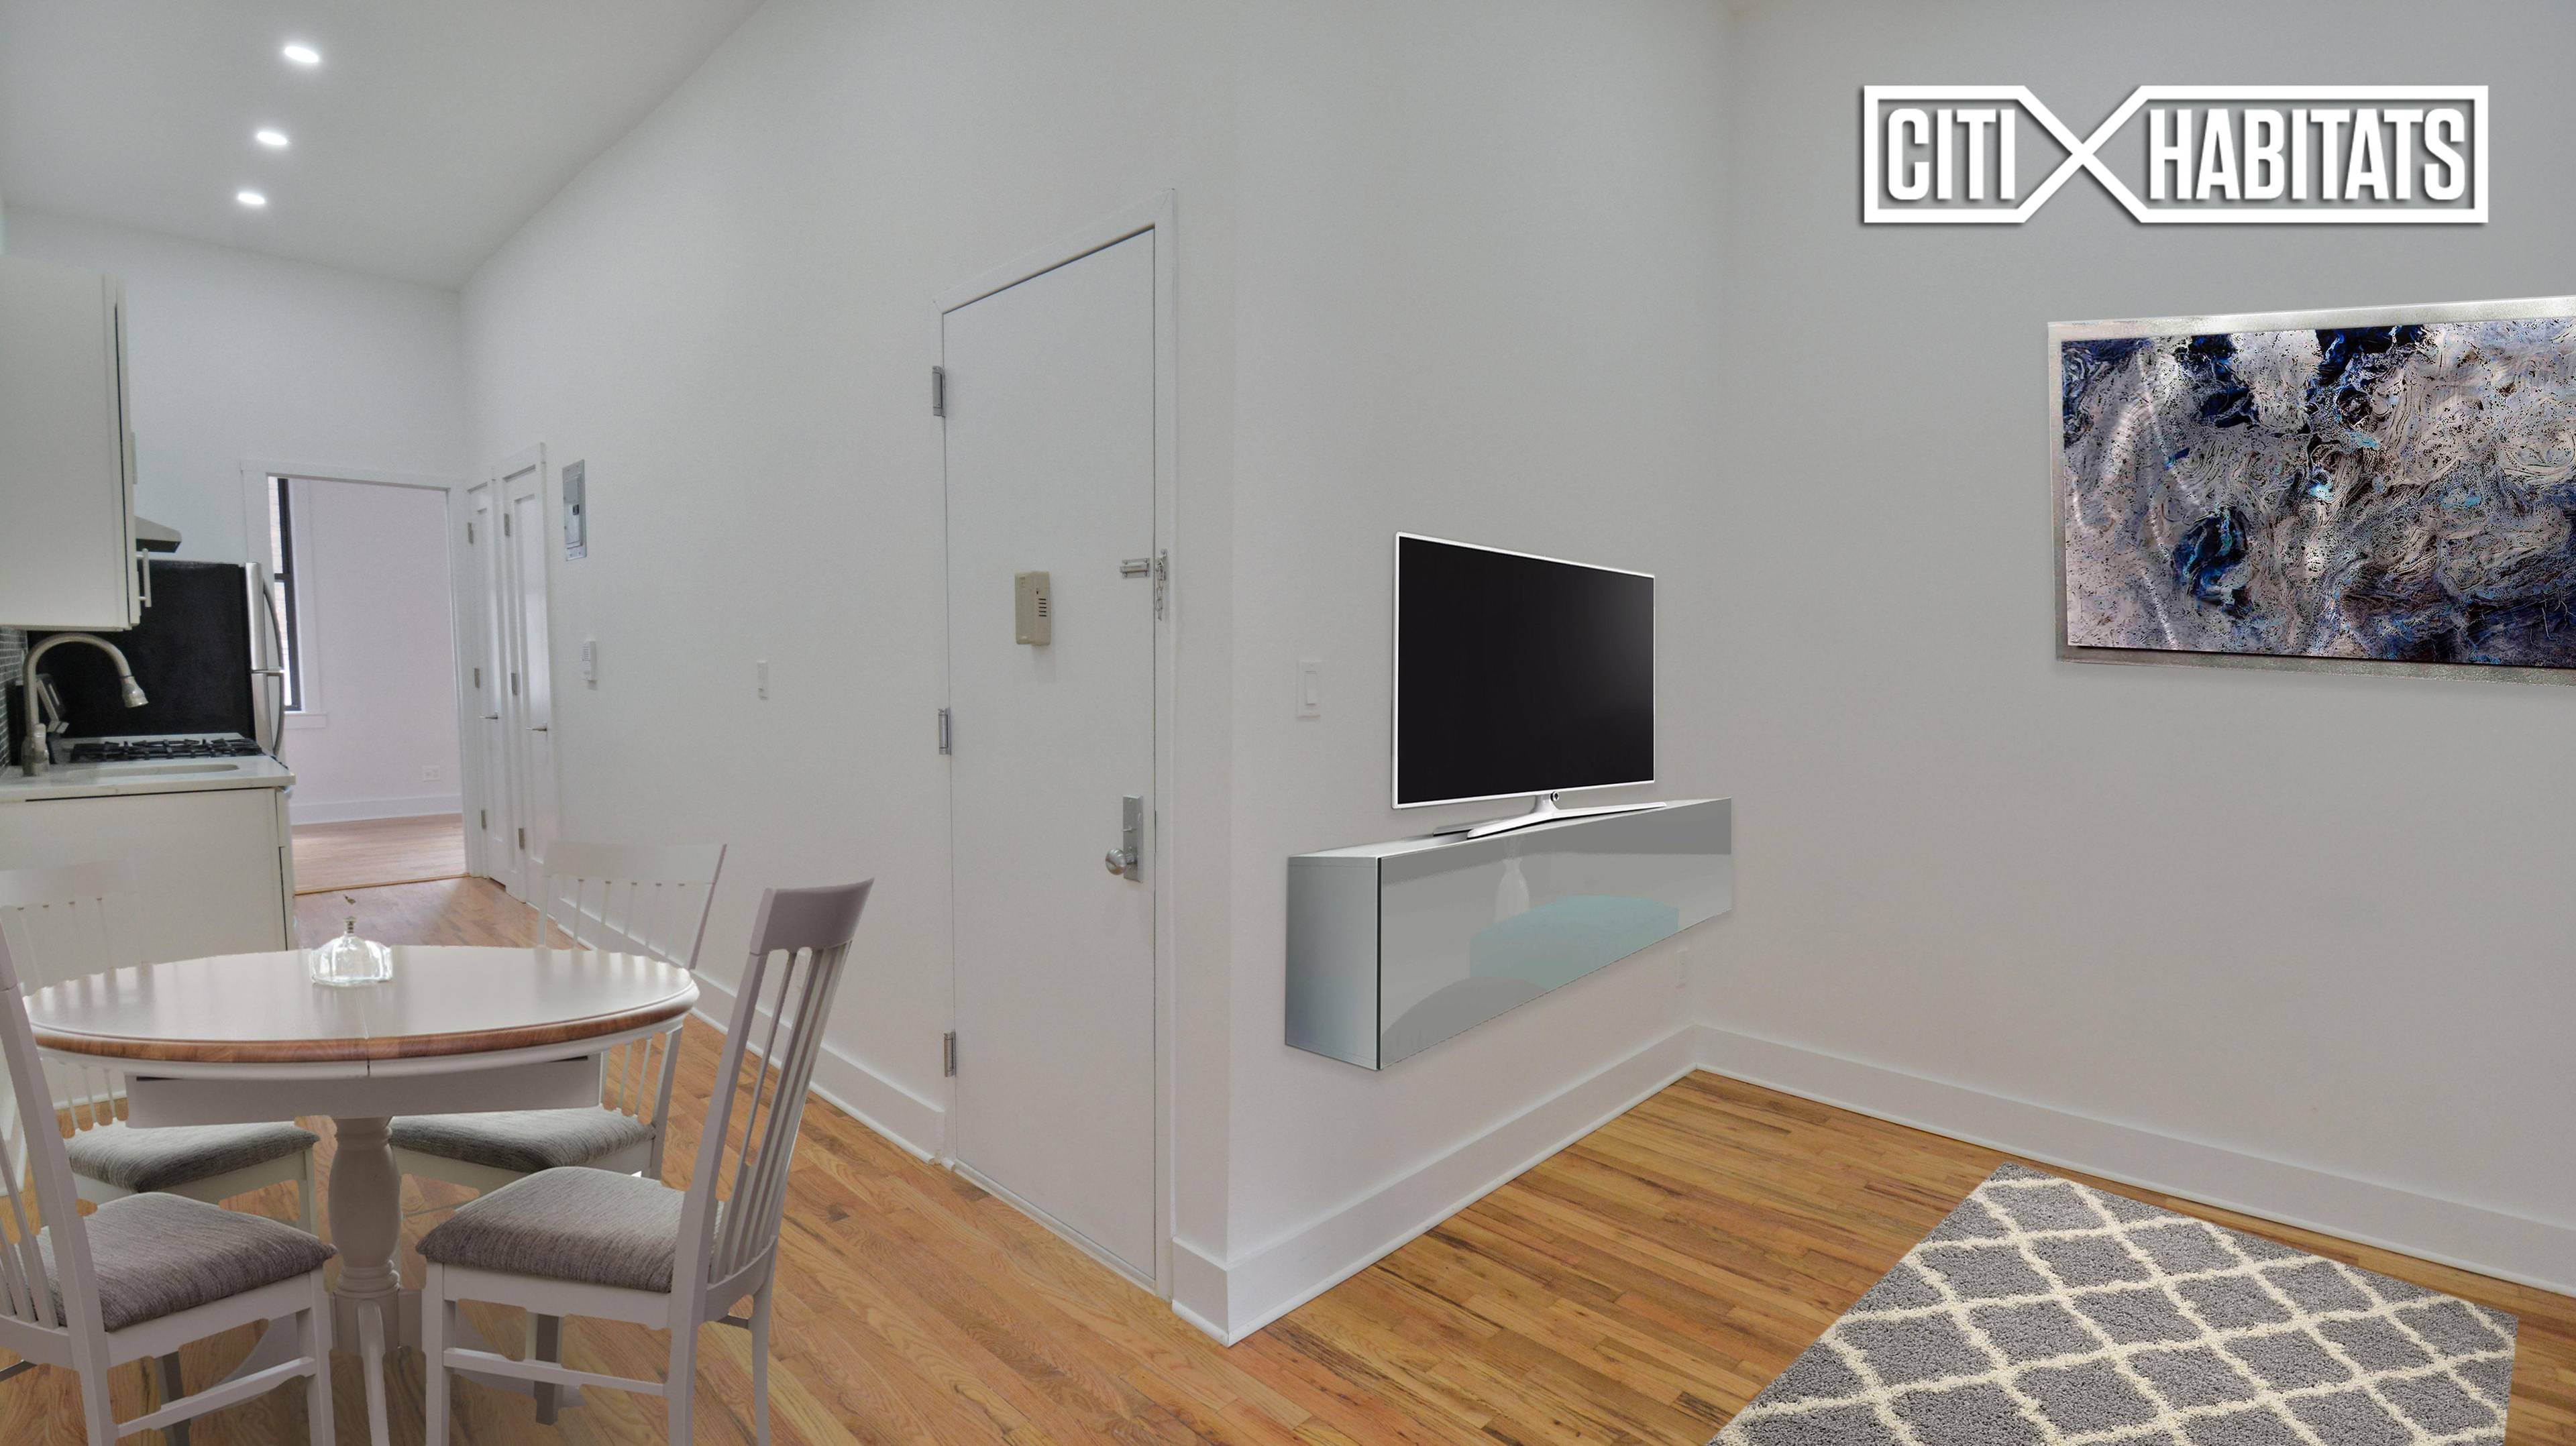 Freshly renovated garden 2 bedroom unit with high ceilings, new tiles, stainless appliances, new lighting, gleaming hardwood flooring and central location in the burgeoning new Harlem.